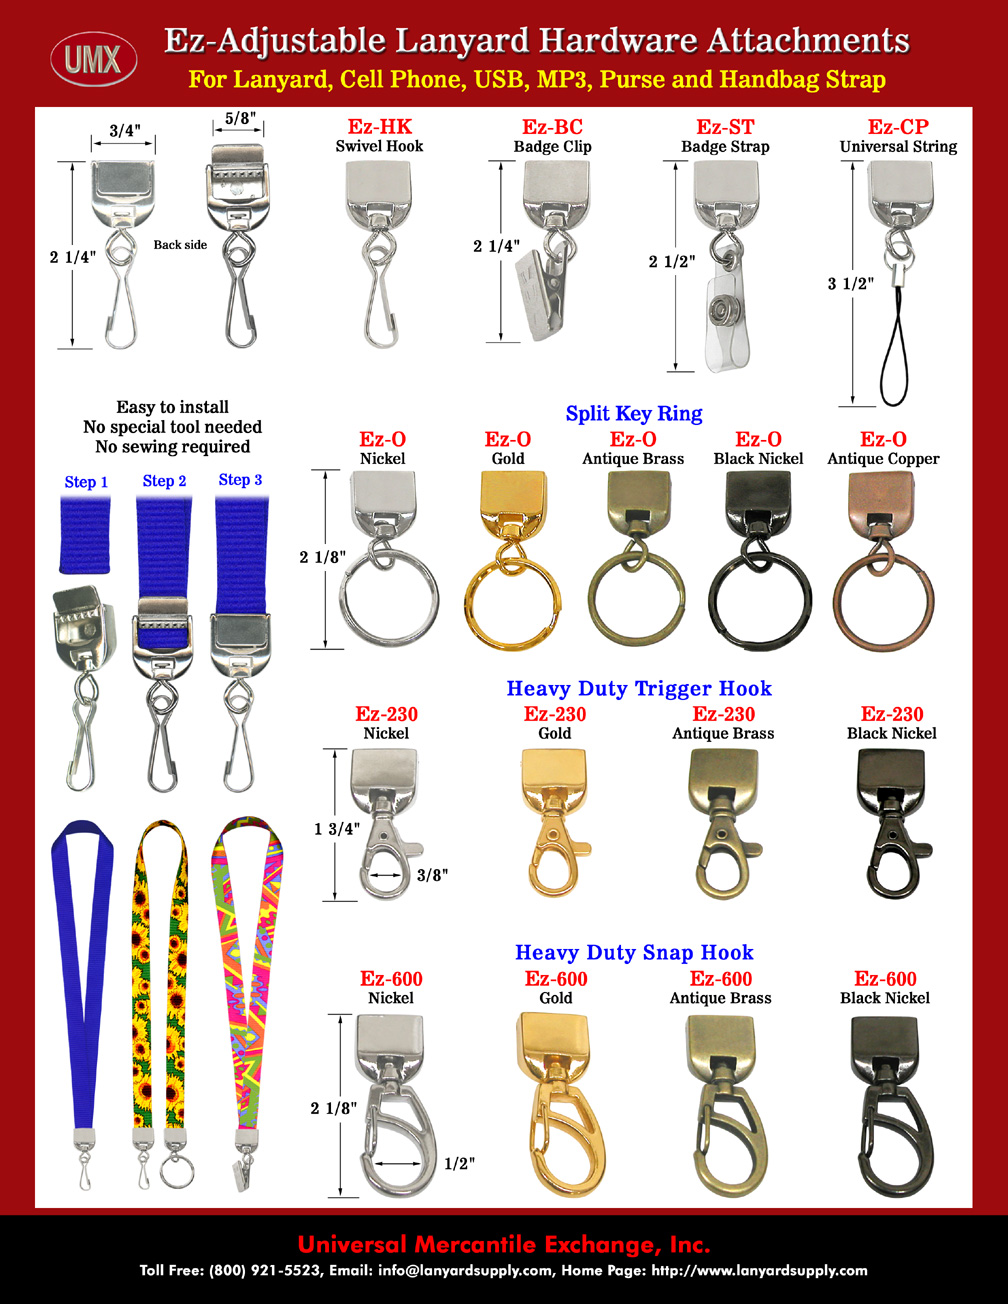 Ez-Adjustable Lanyards: Variable Length Lanyards With Belt or Hat Straps Style of Lanyard Clasps.